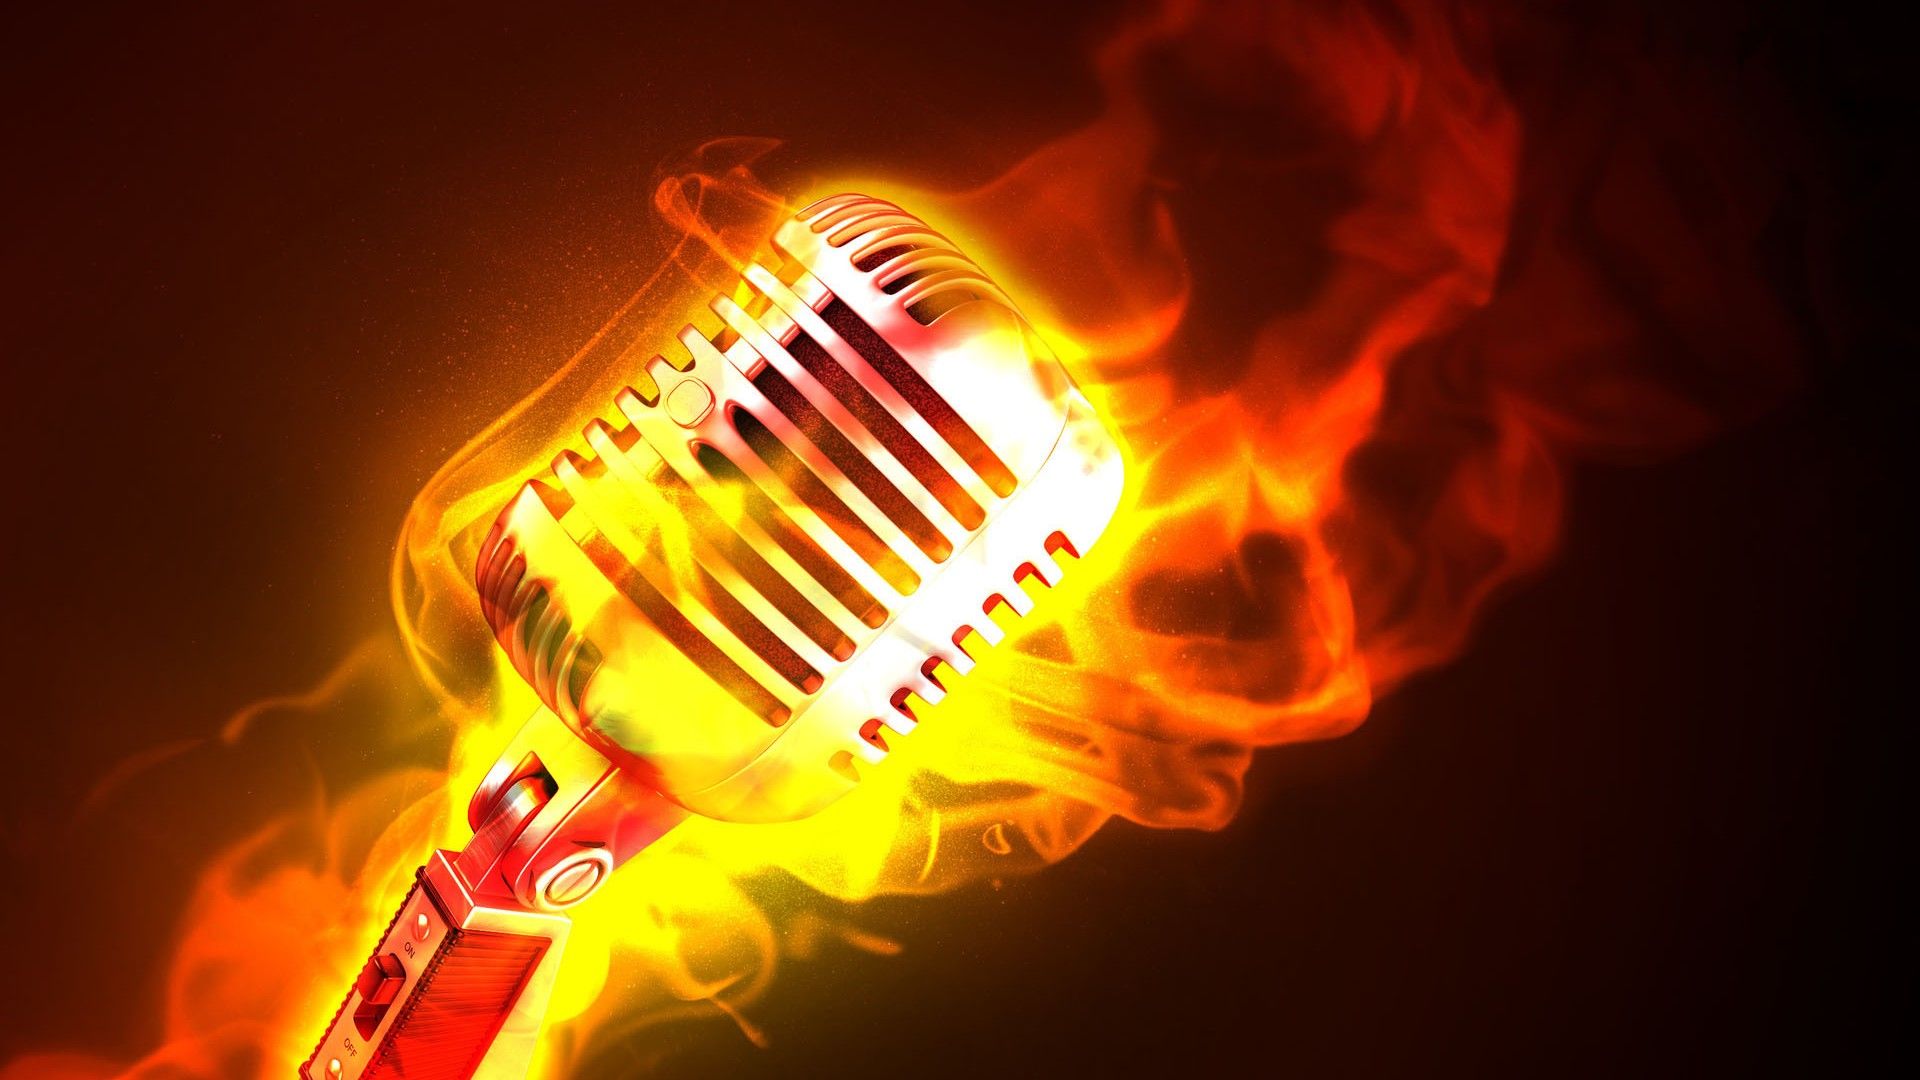 Awesome Microphone wallpaperx1080